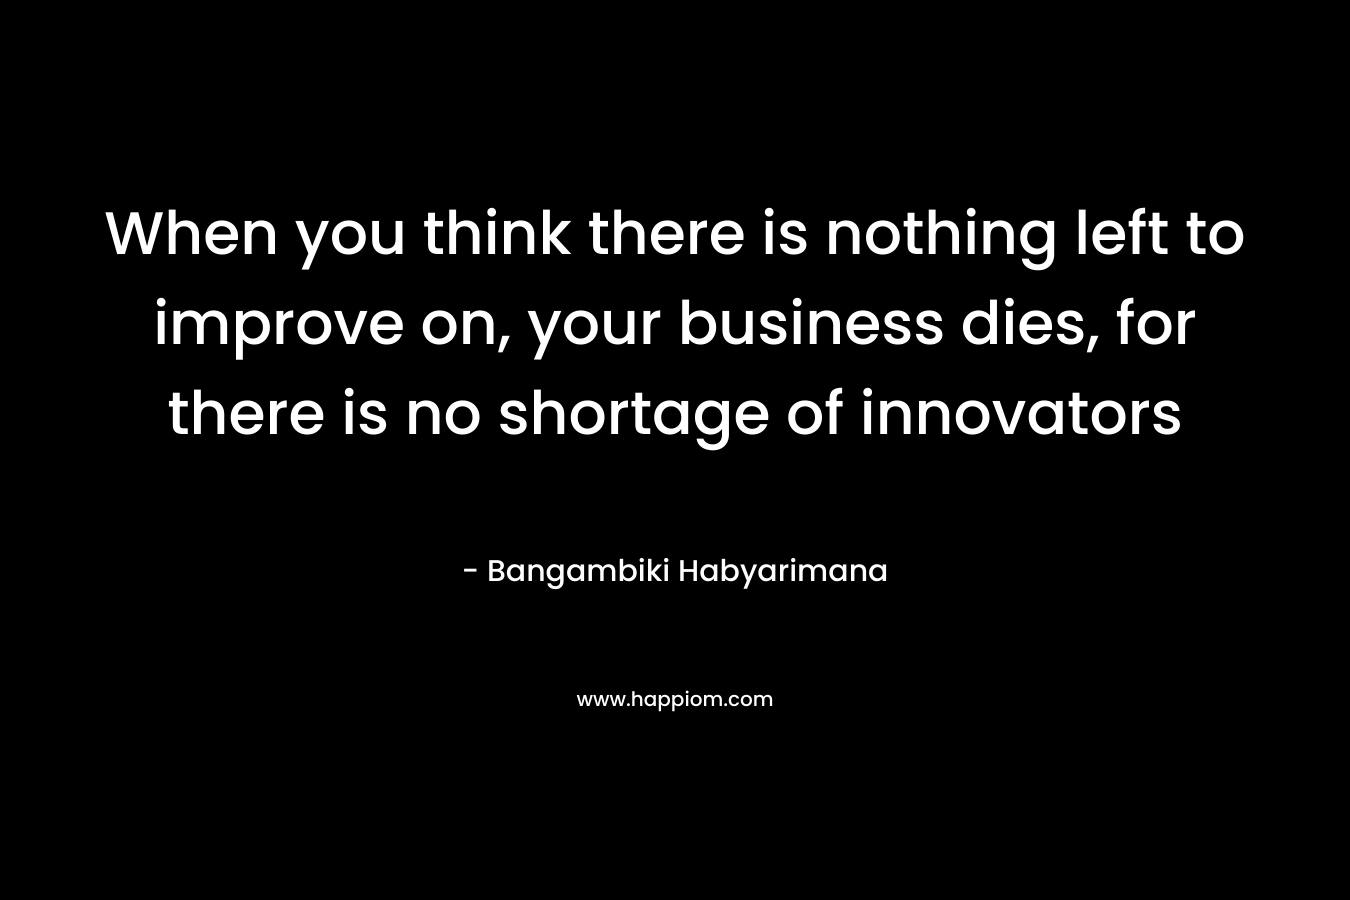 When you think there is nothing left to improve on, your business dies, for there is no shortage of innovators – Bangambiki Habyarimana